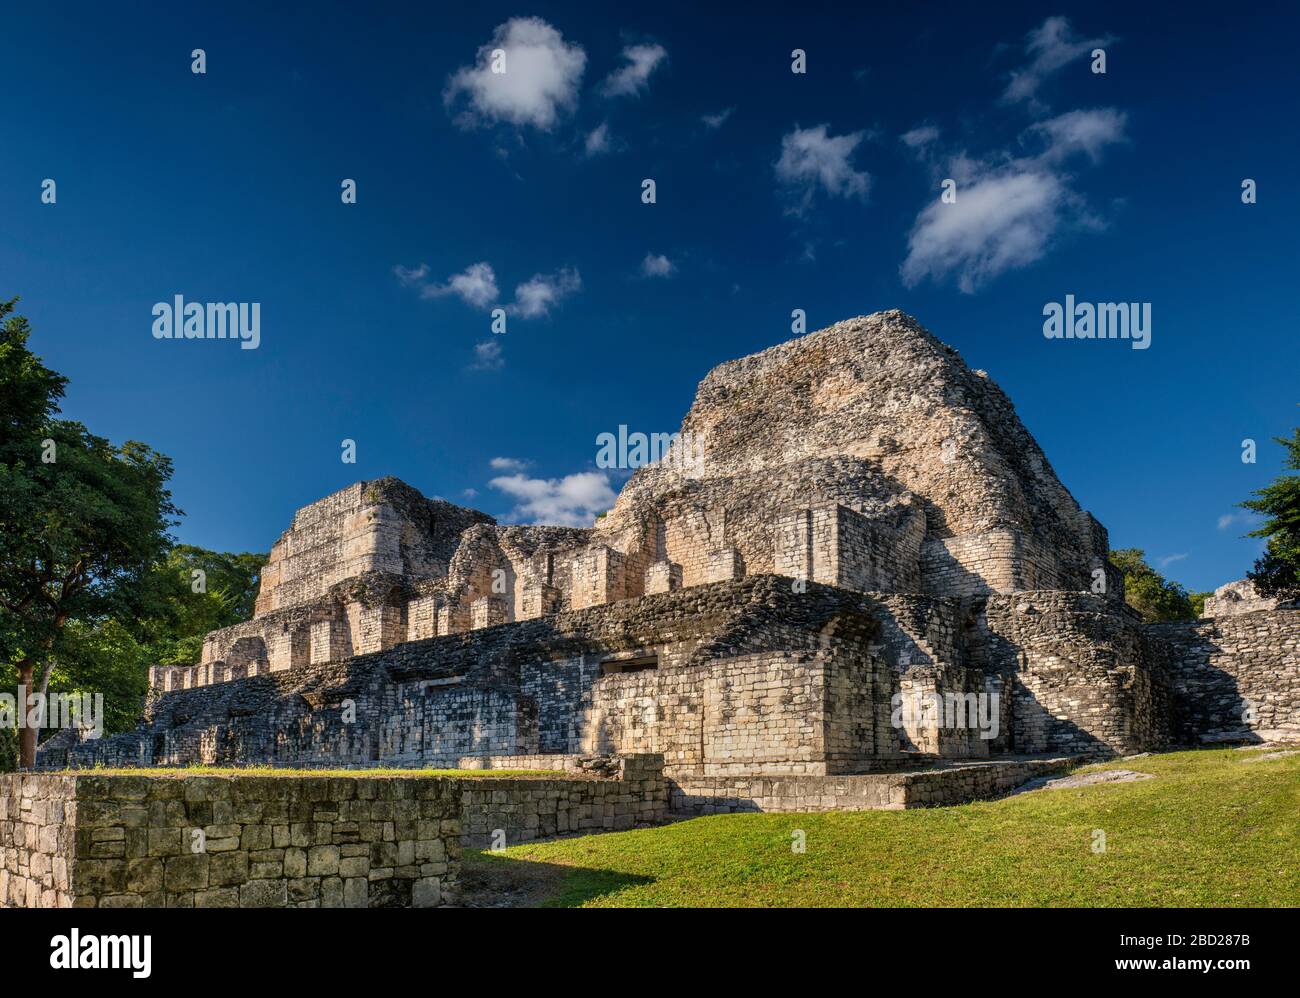 Estructura I (Structure 1), twin-towered pyramid, Maya ruins at Becan archaeological site, La Ruta Rio Bec, Yucatan Peninsula, Campeche state, Mexico Stock Photo